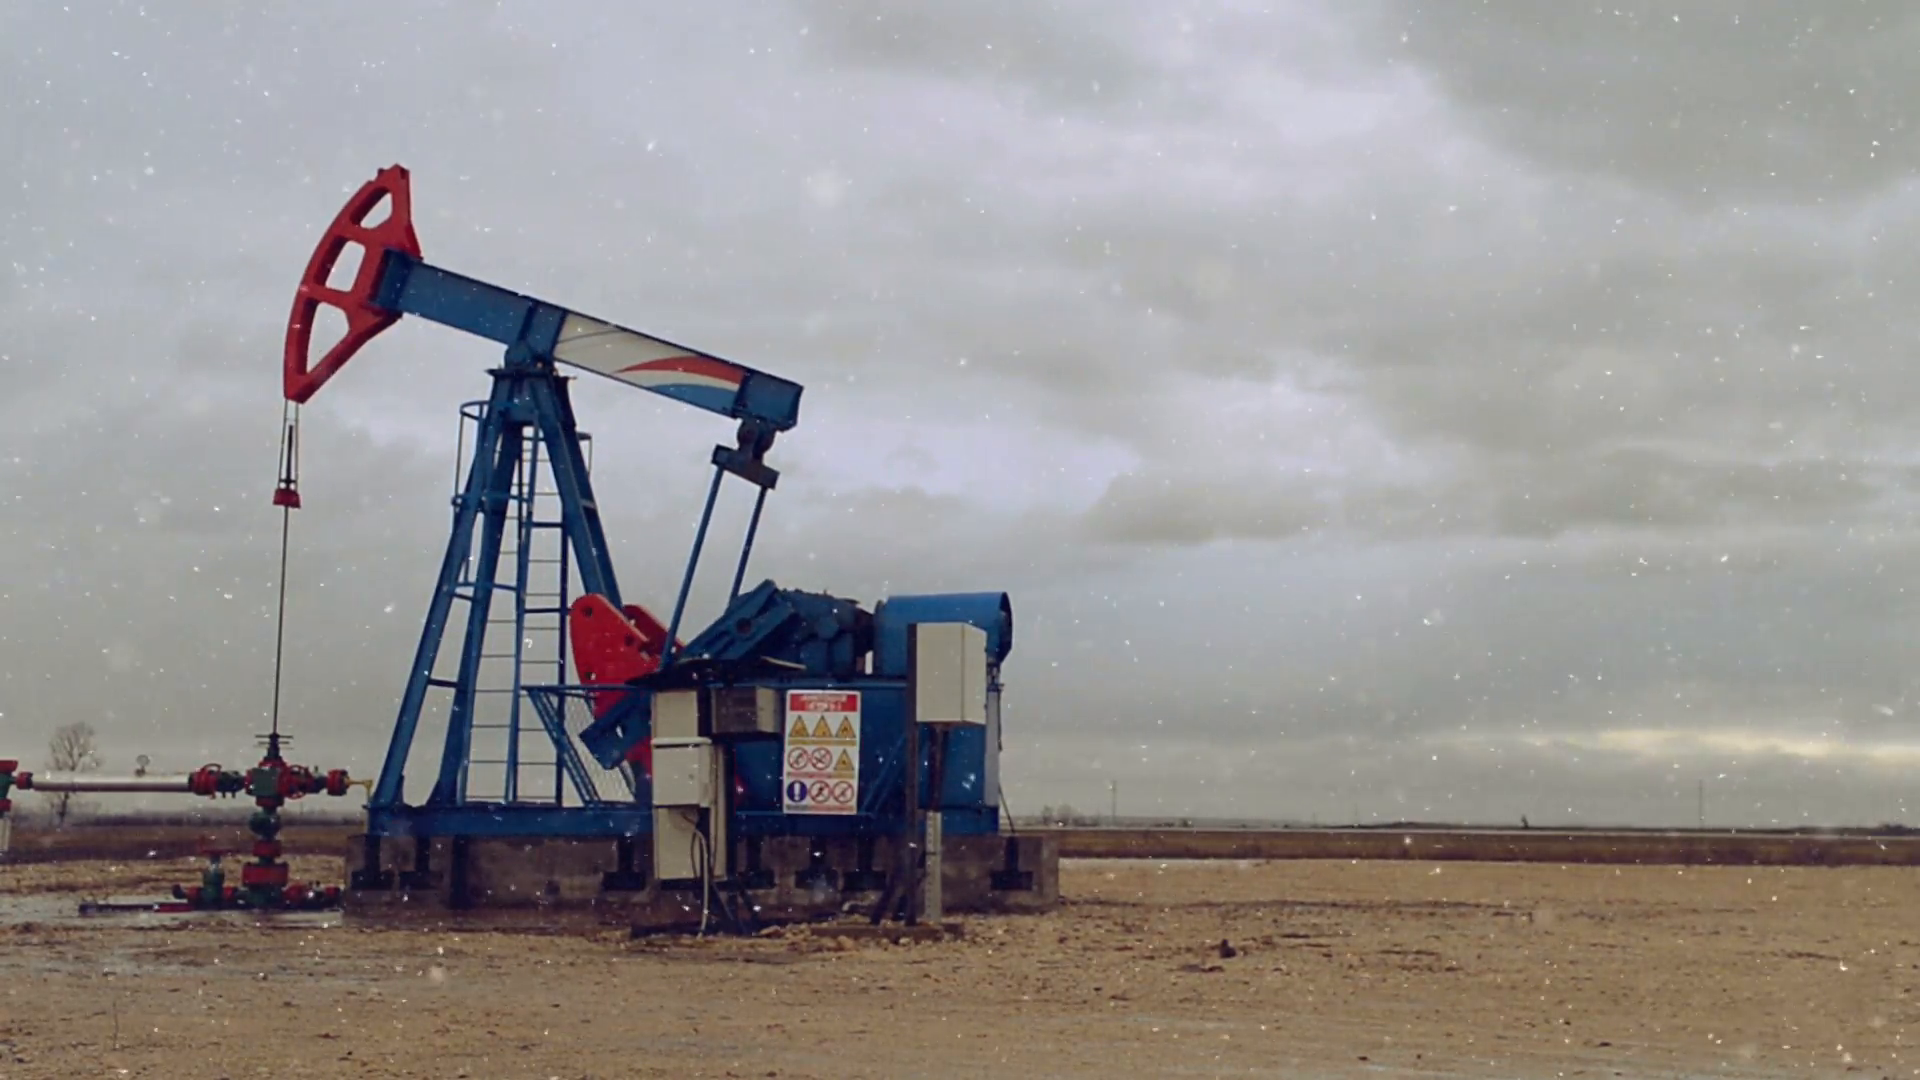 Pumpjack Oil Pump Operating On Natural Gas In The Field Pumping From The Oil Well During The Winter Snofall Season. 1920X1080 Full Hd Footage. - Natural Gas, Transparent background PNG HD thumbnail